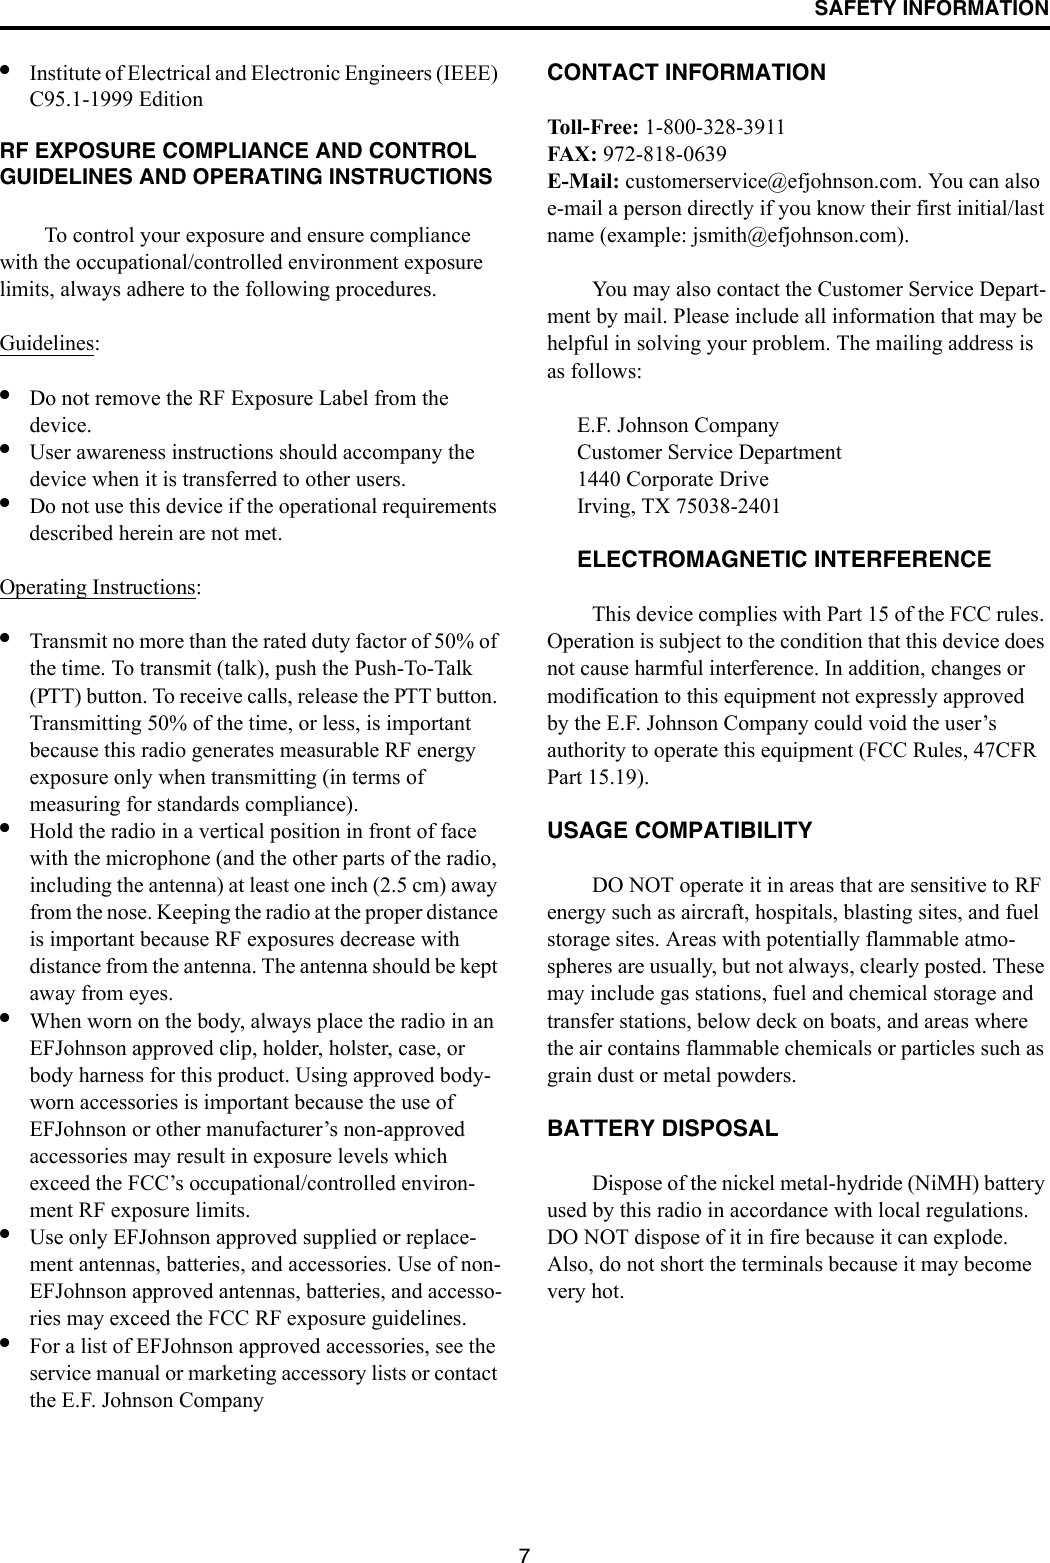 SAFETY INFORMATION7•Institute of Electrical and Electronic Engineers (IEEE) C95.1-1999 Edition RF EXPOSURE COMPLIANCE AND CONTROL GUIDELINES AND OPERATING INSTRUCTIONSTo control your exposure and ensure compliance with the occupational/controlled environment exposure limits, always adhere to the following procedures.Guidelines:•Do not remove the RF Exposure Label from the device. •User awareness instructions should accompany the device when it is transferred to other users. •Do not use this device if the operational requirements described herein are not met. Operating Instructions: •Transmit no more than the rated duty factor of 50% of the time. To transmit (talk), push the Push-To-Talk (PTT) button. To receive calls, release the PTT button. Transmitting 50% of the time, or less, is important because this radio generates measurable RF energy exposure only when transmitting (in terms of measuring for standards compliance).•Hold the radio in a vertical position in front of face with the microphone (and the other parts of the radio, including the antenna) at least one inch (2.5 cm) away from the nose. Keeping the radio at the proper distance is important because RF exposures decrease with distance from the antenna. The antenna should be kept away from eyes. •When worn on the body, always place the radio in an EFJohnson approved clip, holder, holster, case, or body harness for this product. Using approved body-worn accessories is important because the use of EFJohnson or other manufacturer’s non-approved accessories may result in exposure levels which exceed the FCC’s occupational/controlled environ-ment RF exposure limits. •Use only EFJohnson approved supplied or replace-ment antennas, batteries, and accessories. Use of non-EFJohnson approved antennas, batteries, and accesso-ries may exceed the FCC RF exposure guidelines. •For a list of EFJohnson approved accessories, see the service manual or marketing accessory lists or contact the E.F. Johnson Company CONTACT INFORMATIONToll- Free: 1-800-328-3911FAX: 972-818-0639E-Mail: customerservice@efjohnson.com. You can also e-mail a person directly if you know their first initial/last name (example: jsmith@efjohnson.com).You may also contact the Customer Service Depart-ment by mail. Please include all information that may be helpful in solving your problem. The mailing address is as follows: E.F. Johnson CompanyCustomer Service Department 1440 Corporate DriveIrving, TX 75038-2401ELECTROMAGNETIC INTERFERENCE This device complies with Part 15 of the FCC rules. Operation is subject to the condition that this device does not cause harmful interference. In addition, changes or modification to this equipment not expressly approved by the E.F. Johnson Company could void the user’s authority to operate this equipment (FCC Rules, 47CFR Part 15.19). USAGE COMPATIBILITYDO NOT operate it in areas that are sensitive to RF energy such as aircraft, hospitals, blasting sites, and fuel storage sites. Areas with potentially flammable atmo-spheres are usually, but not always, clearly posted. These may include gas stations, fuel and chemical storage and transfer stations, below deck on boats, and areas where the air contains flammable chemicals or particles such as grain dust or metal powders. BATTERY DISPOSALDispose of the nickel metal-hydride (NiMH) battery used by this radio in accordance with local regulations. DO NOT dispose of it in fire because it can explode. Also, do not short the terminals because it may become very hot.